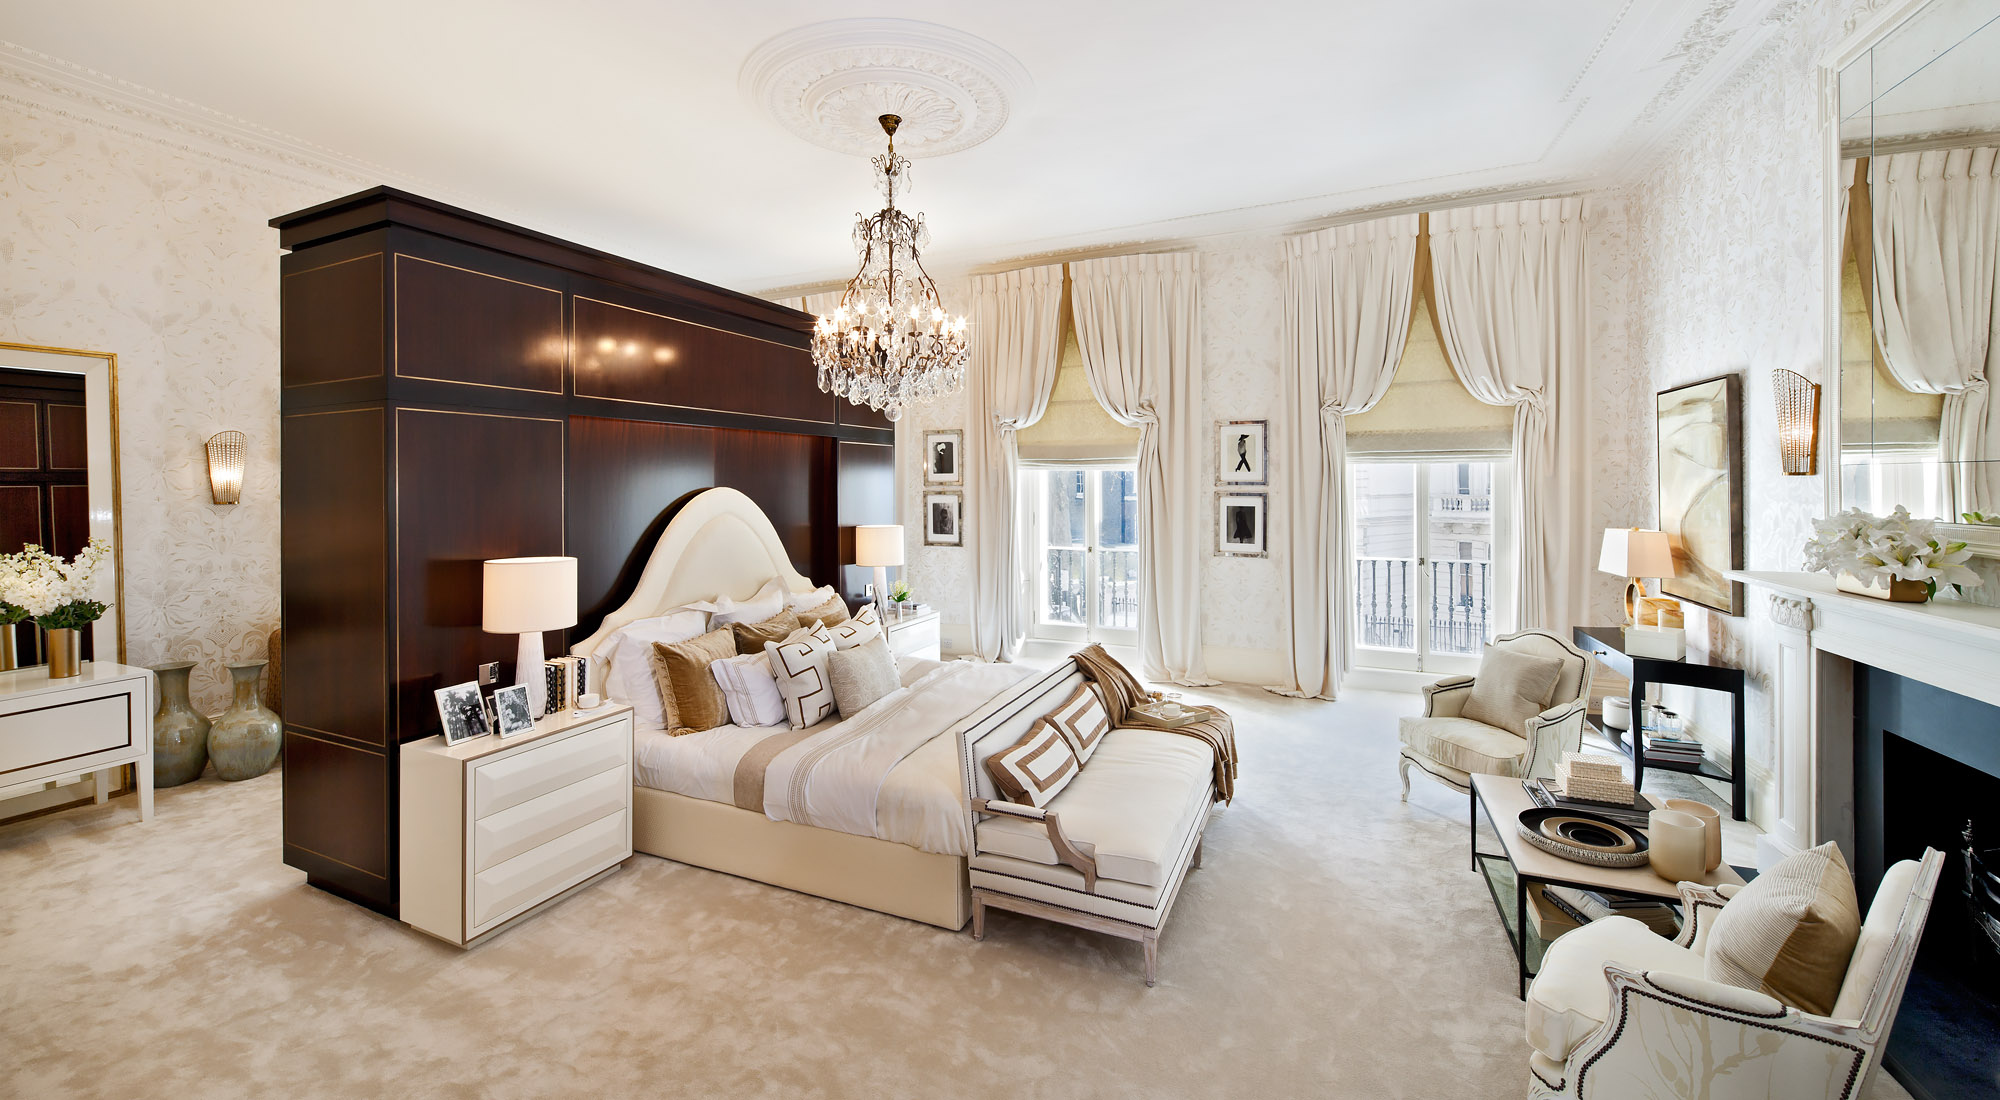 Luxurious bedroom in super-prime residential development of former Red Cross HQ from 8 terraced houses into 17 spacious apartments. Architect: PDP LDN
